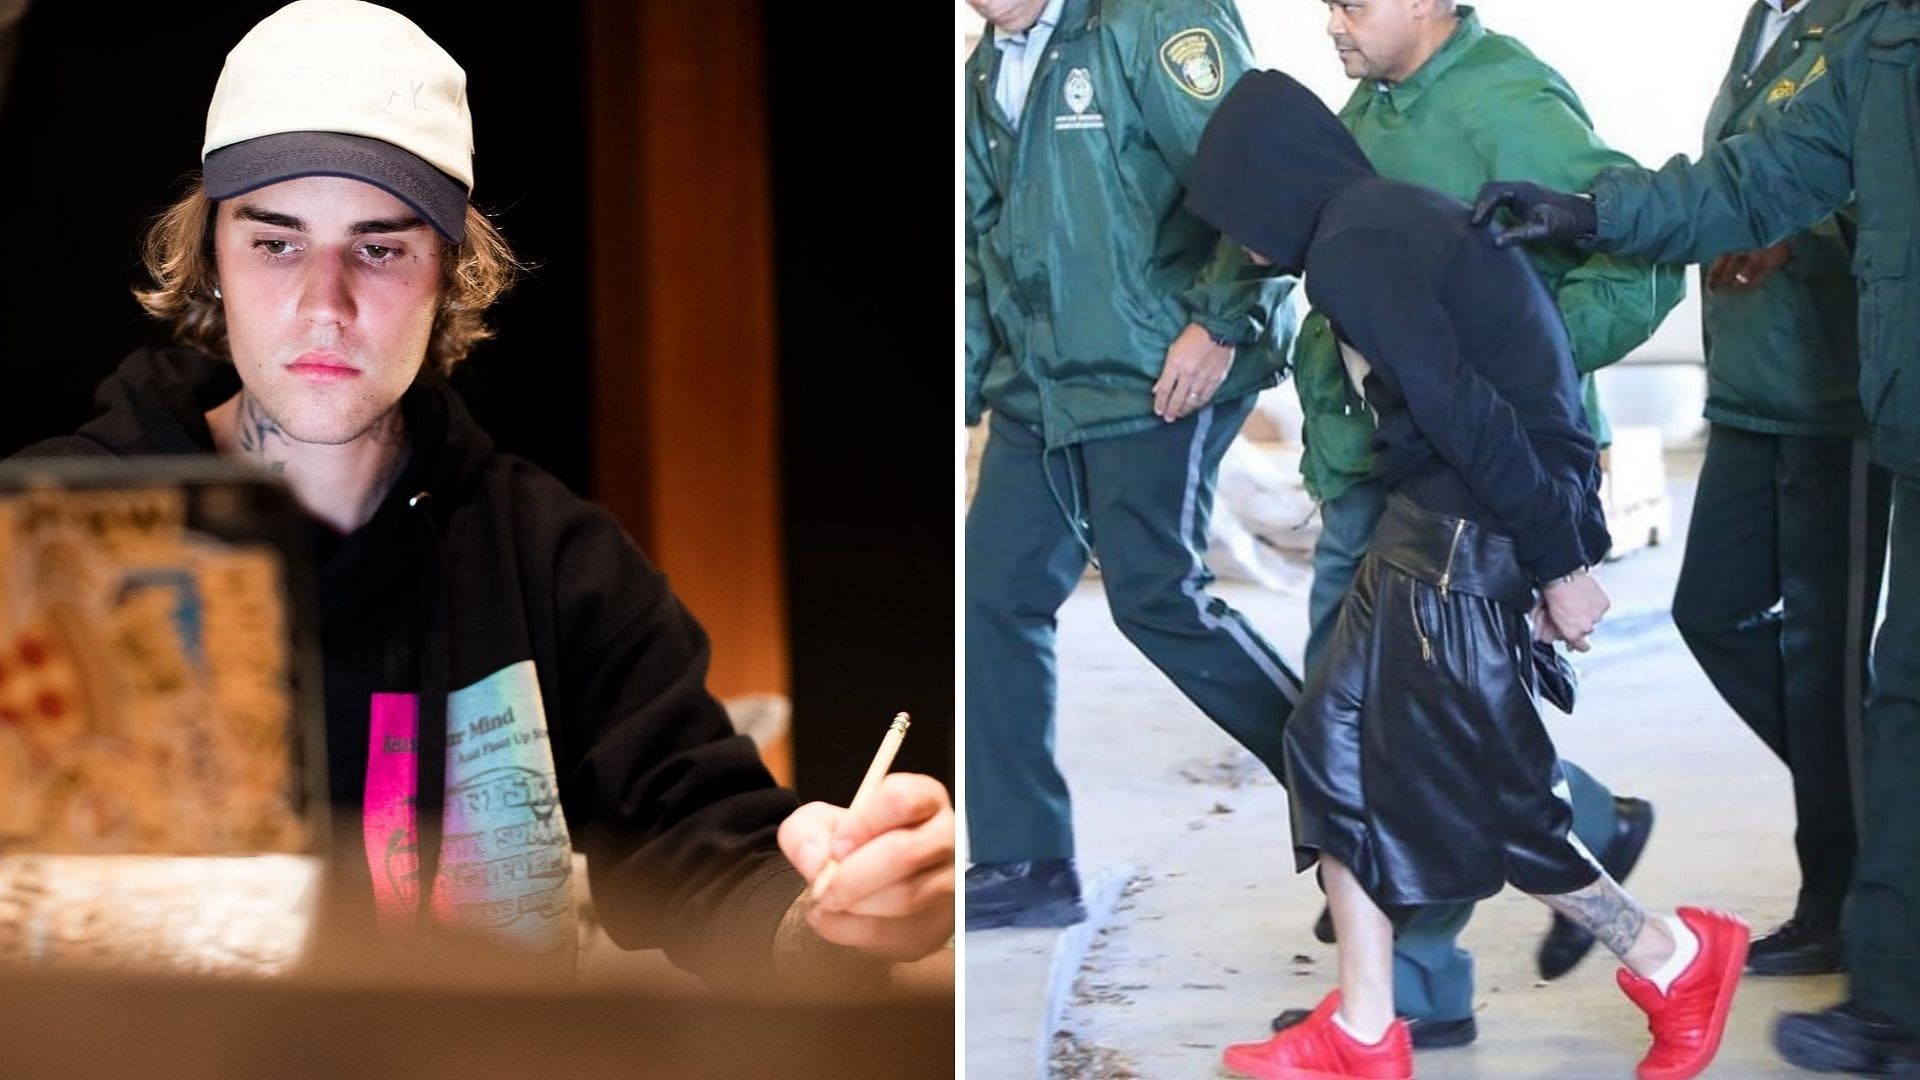 Not My Finest Hour: Justin Bieber Opens Up About 2014 Arrest